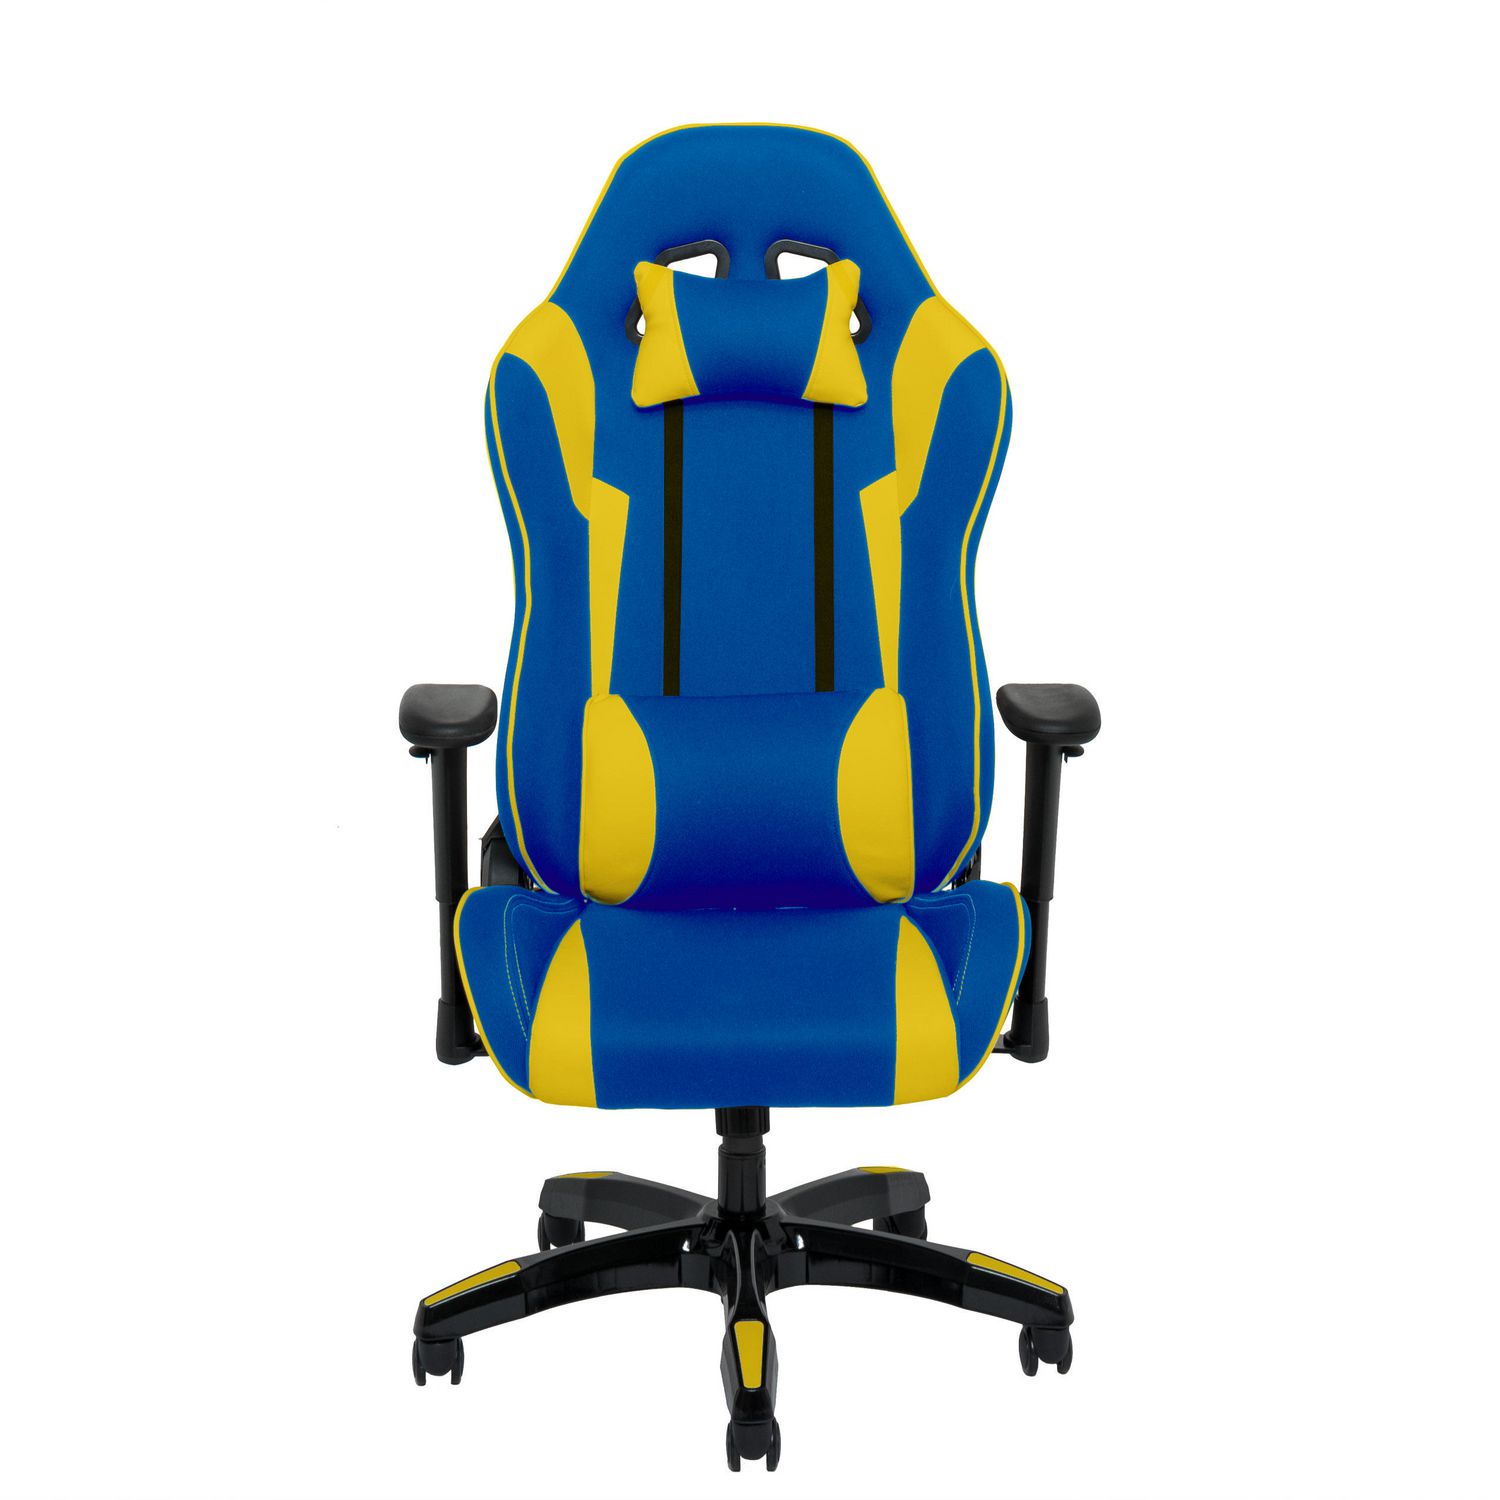 Simple Gaming Chairs Walmart Blue for Living room